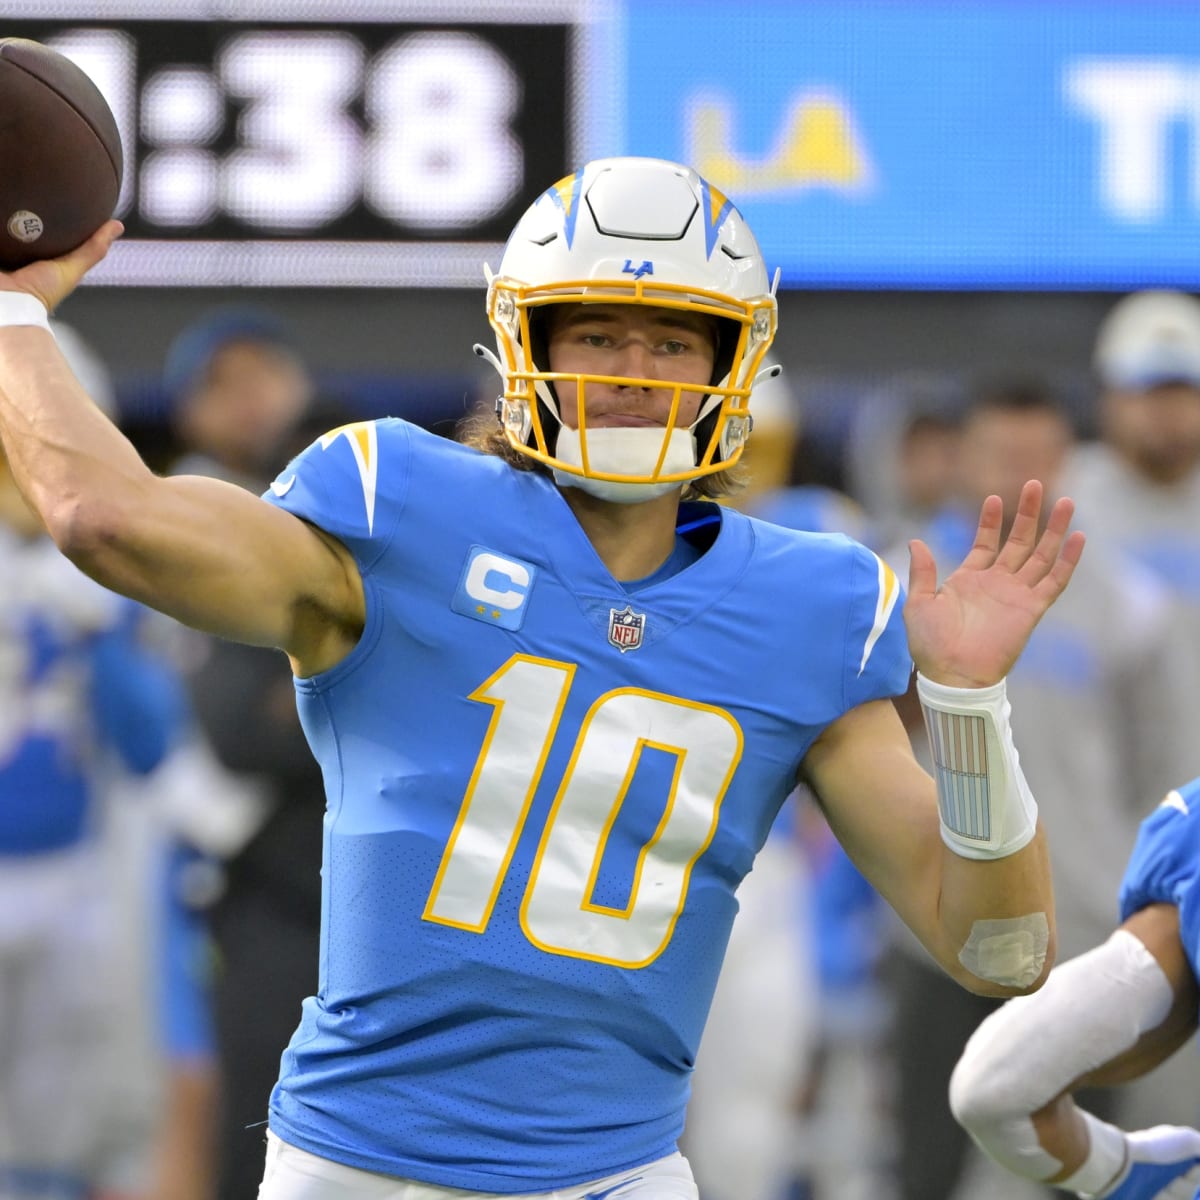 Chargers News: Instant reaction to the Chargers new uniforms - Bolts From  The Blue